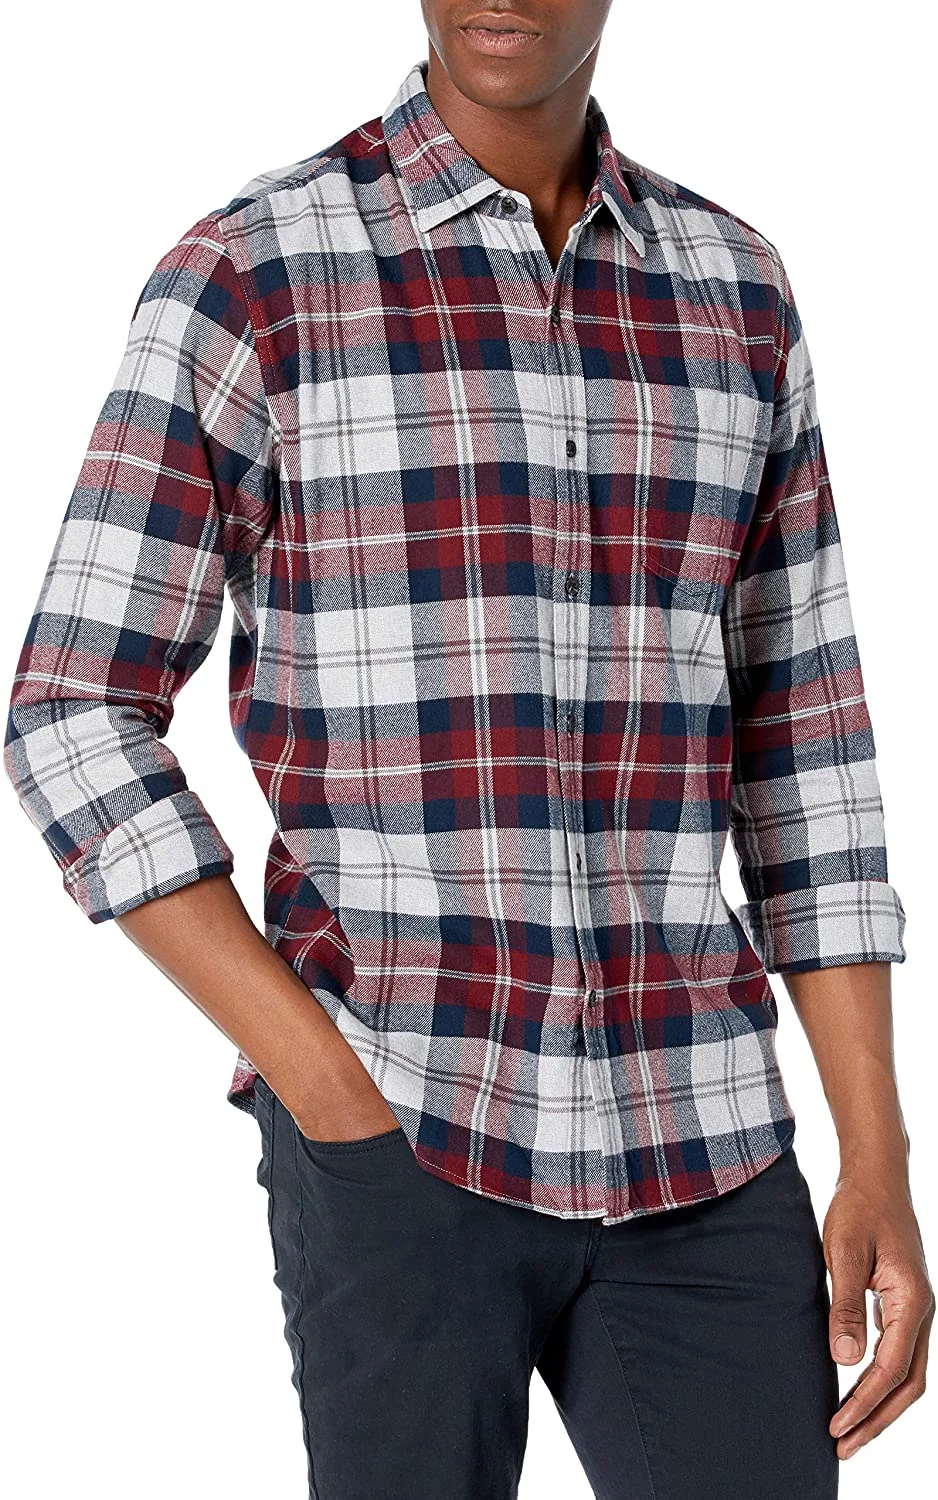 Oxford Shirts - Bangladesh Factory, Suppliers, Manufacturers